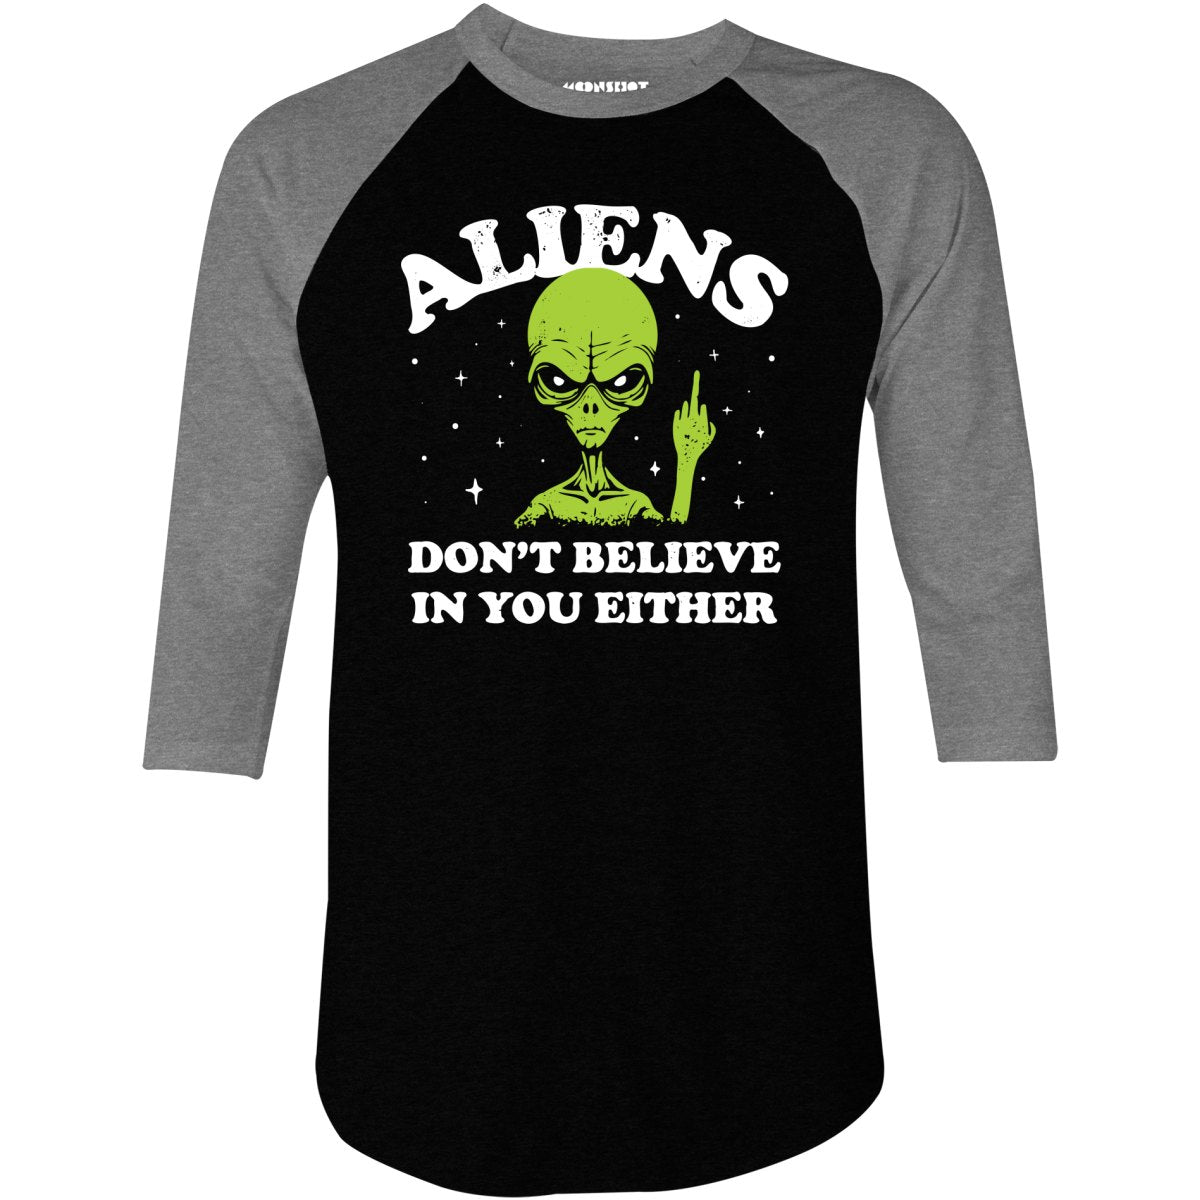 Aliens Don't Believe in You Either - 3/4 Sleeve Raglan T-Shirt